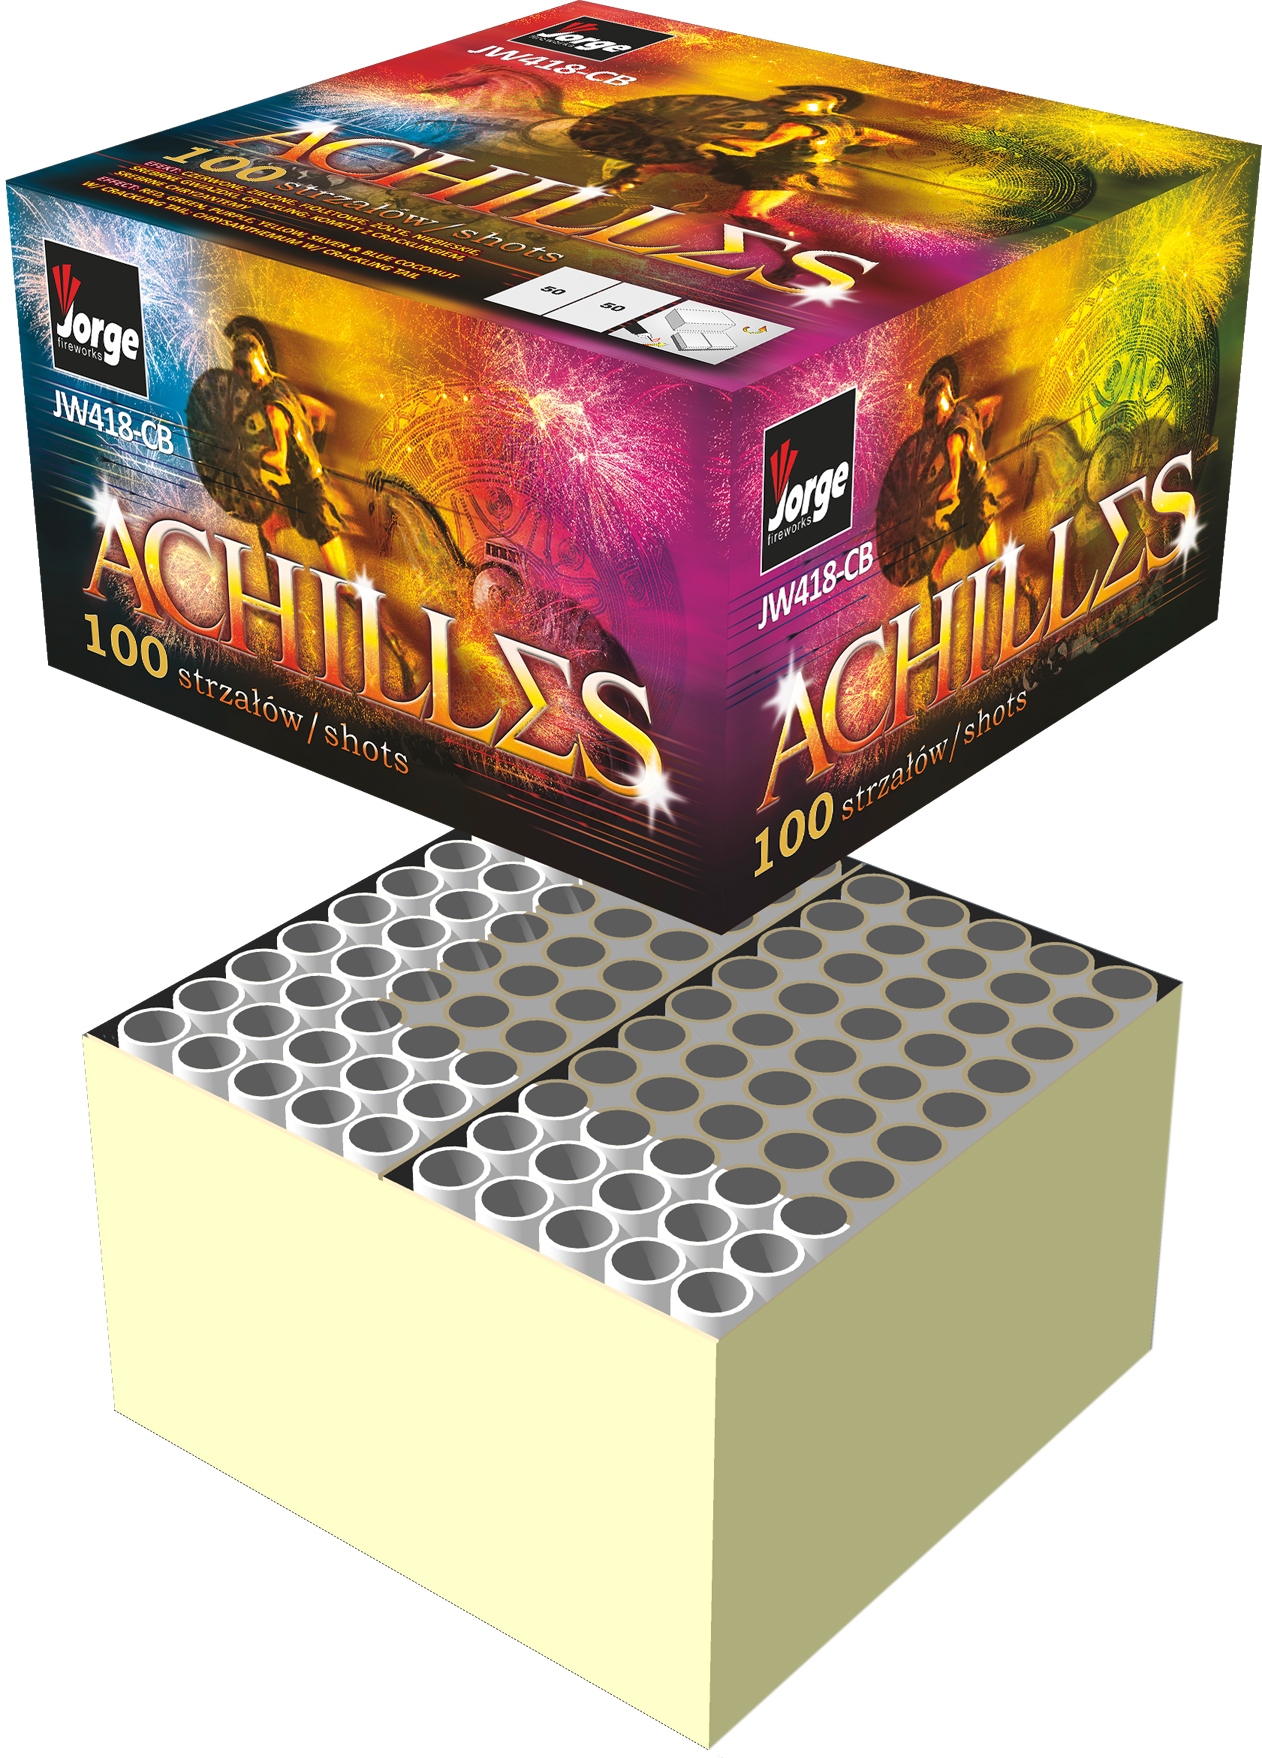 This is a 100 shots compound firework and this 38 Seconds are jam packed with different colours, heights and effects.